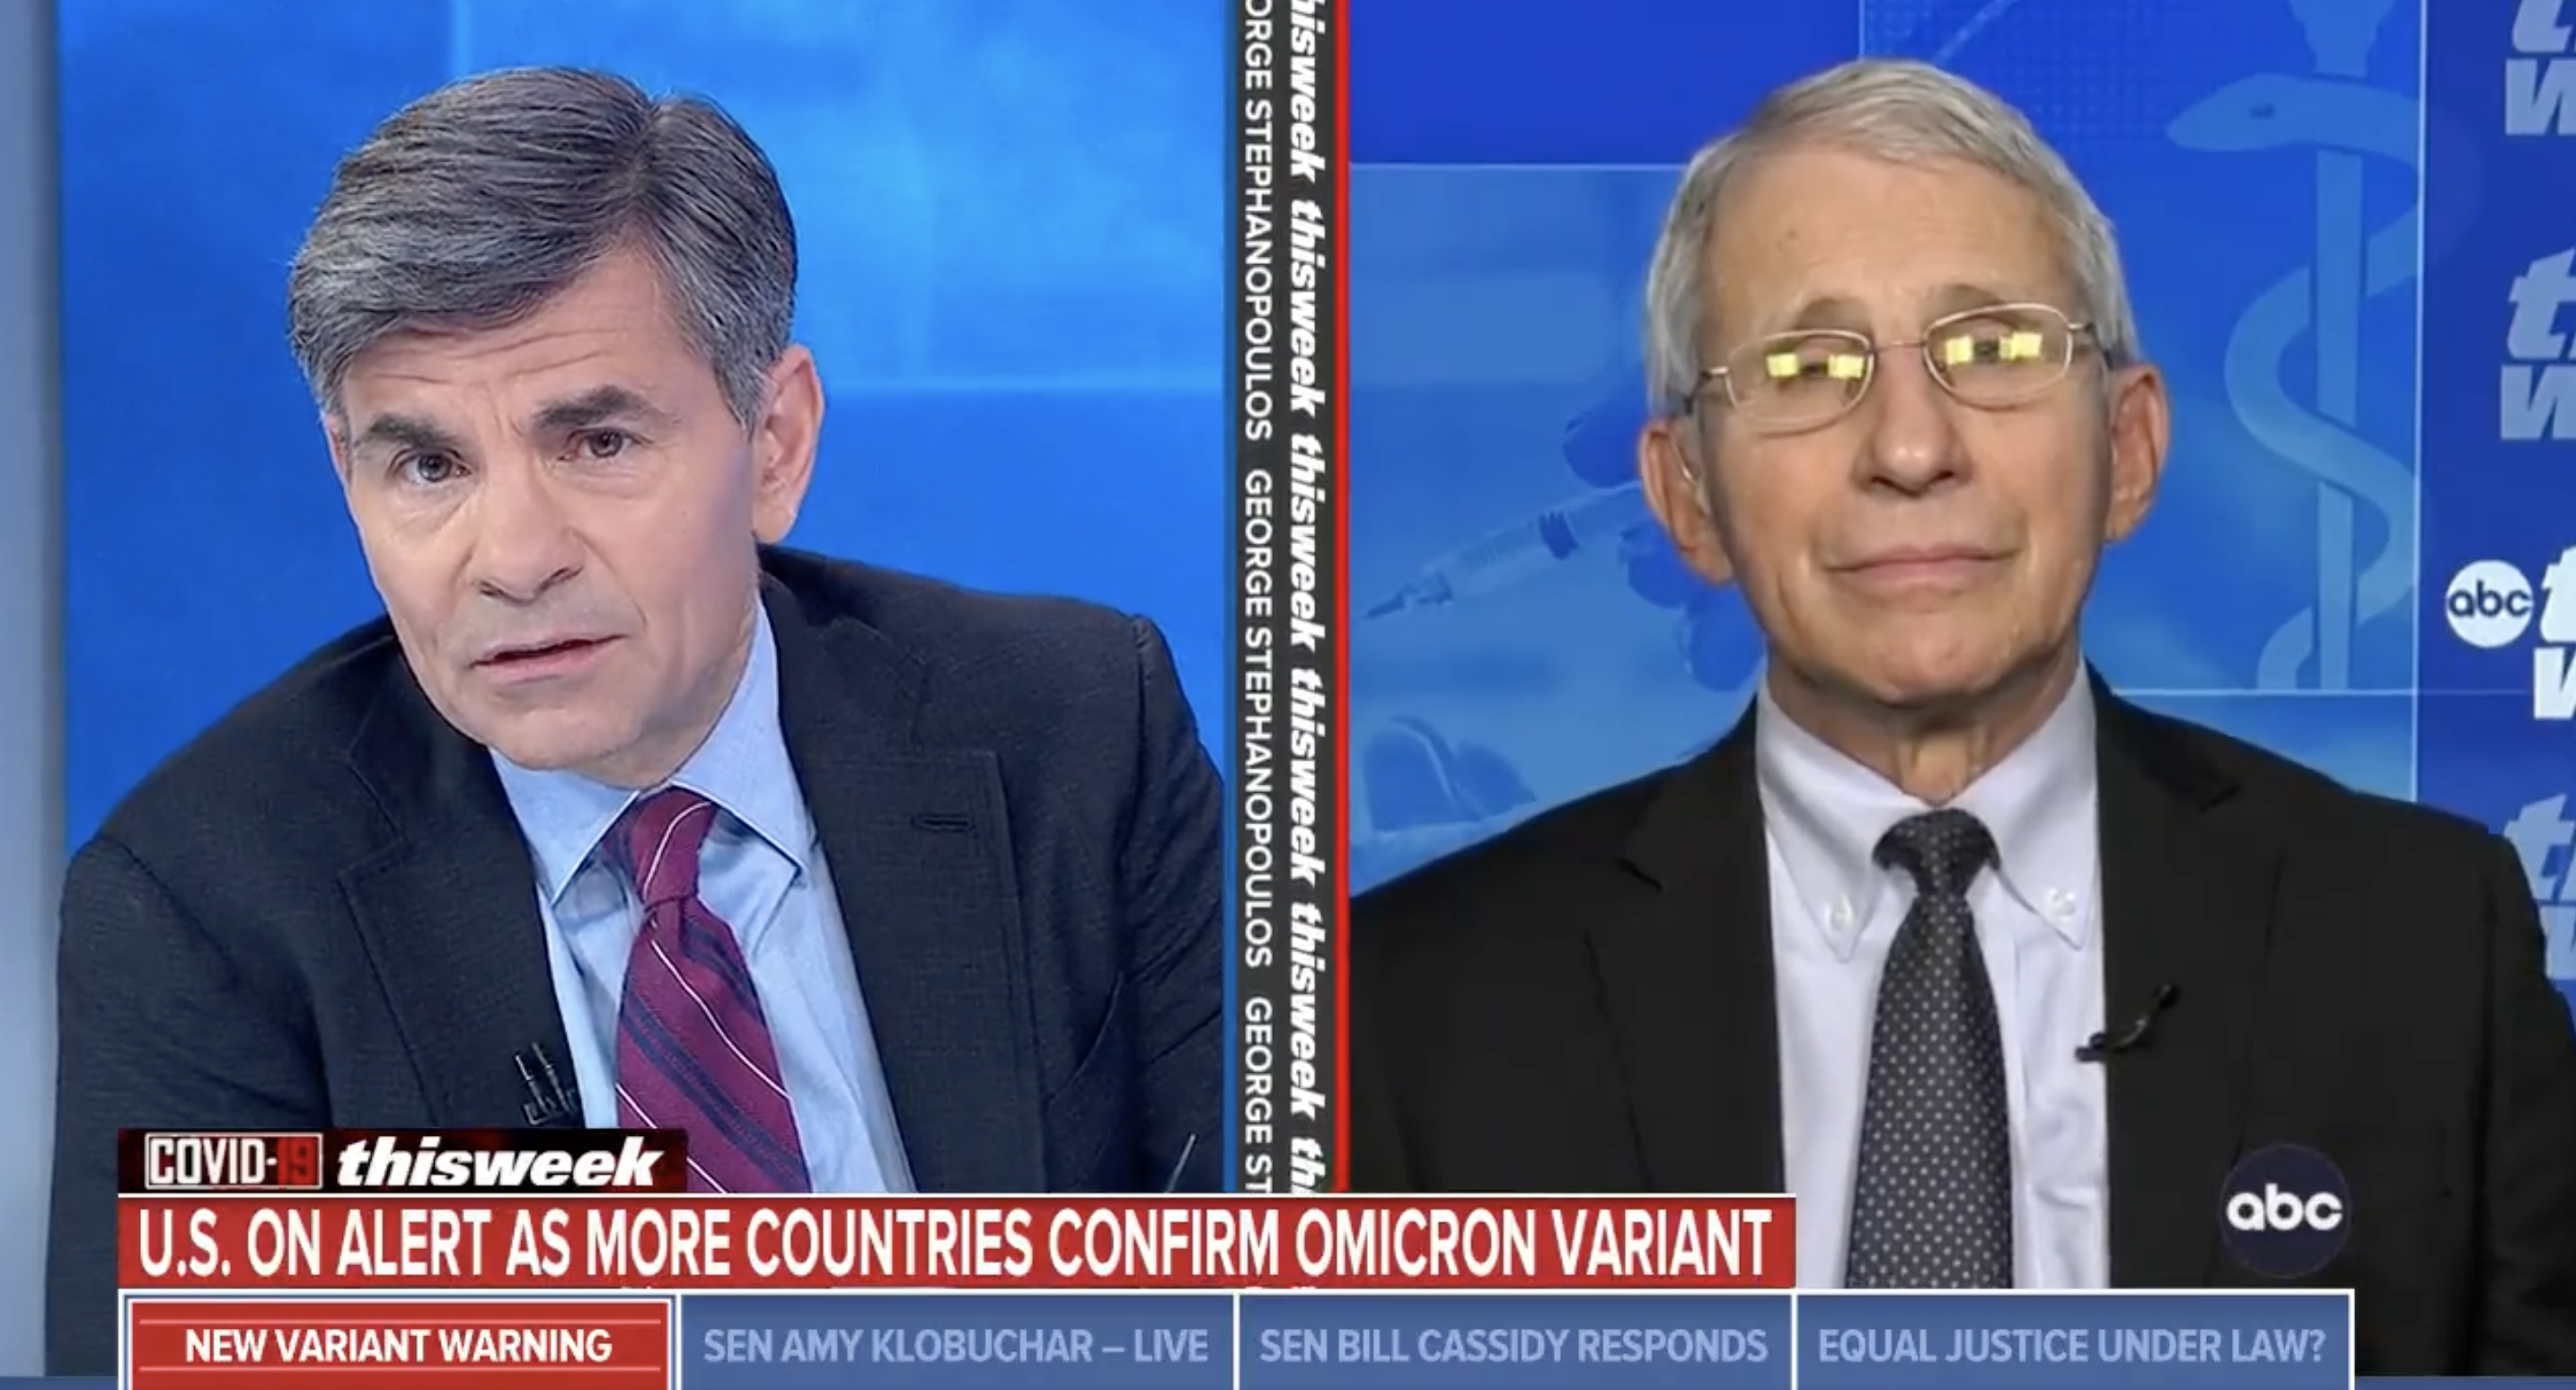 Fauci Tells Stephanopoulos It’s ‘Too Early to Say’ on New Lockdowns, But Warns ‘We Need to Prepare for the Worst’